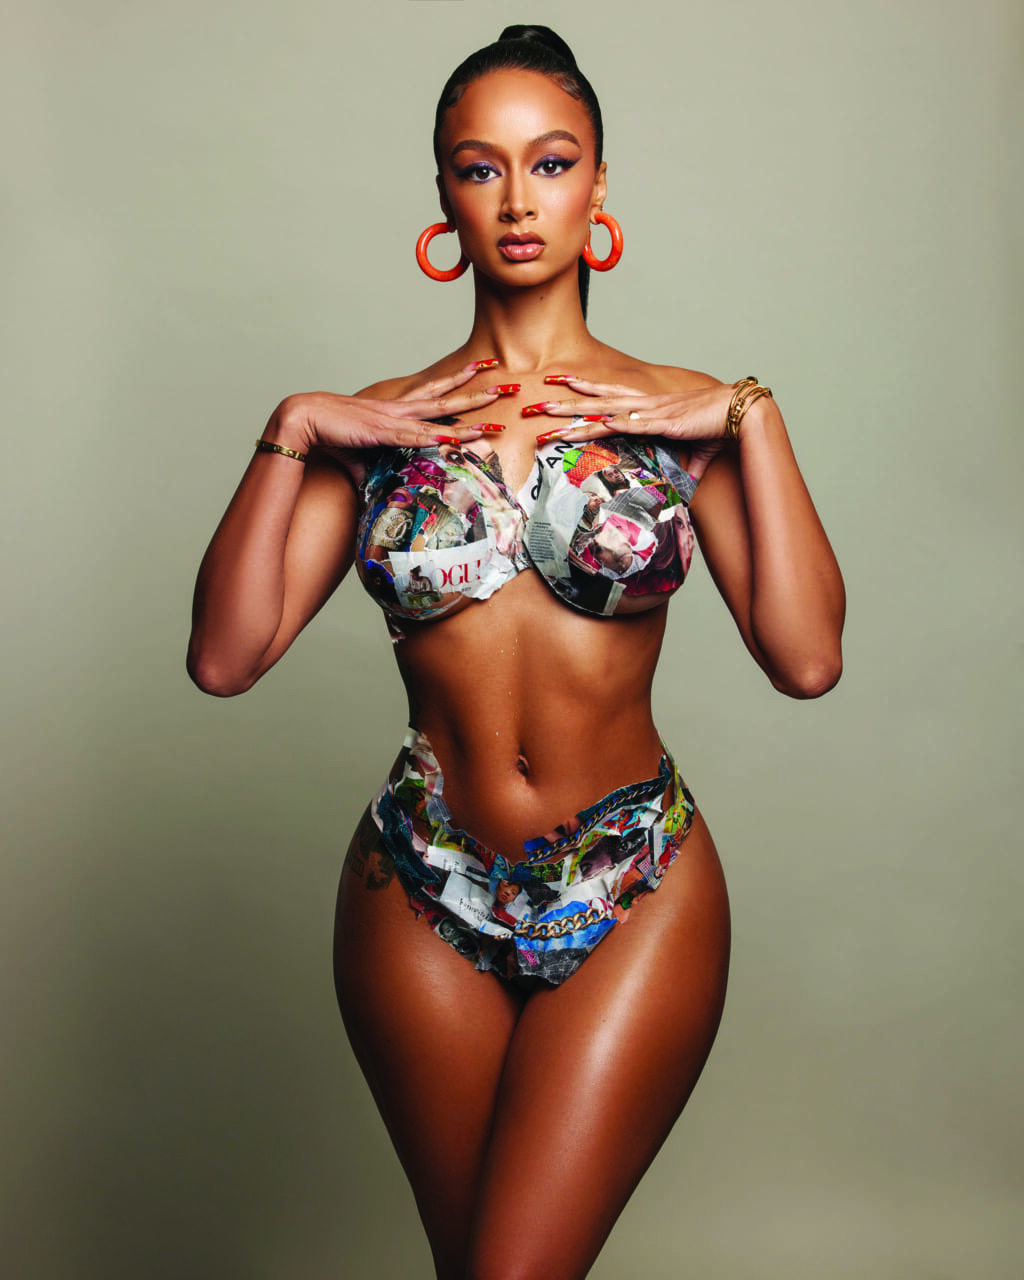 Model, Actress and Swimsuit Designer Draya Michele Is A Rising Star hq picture